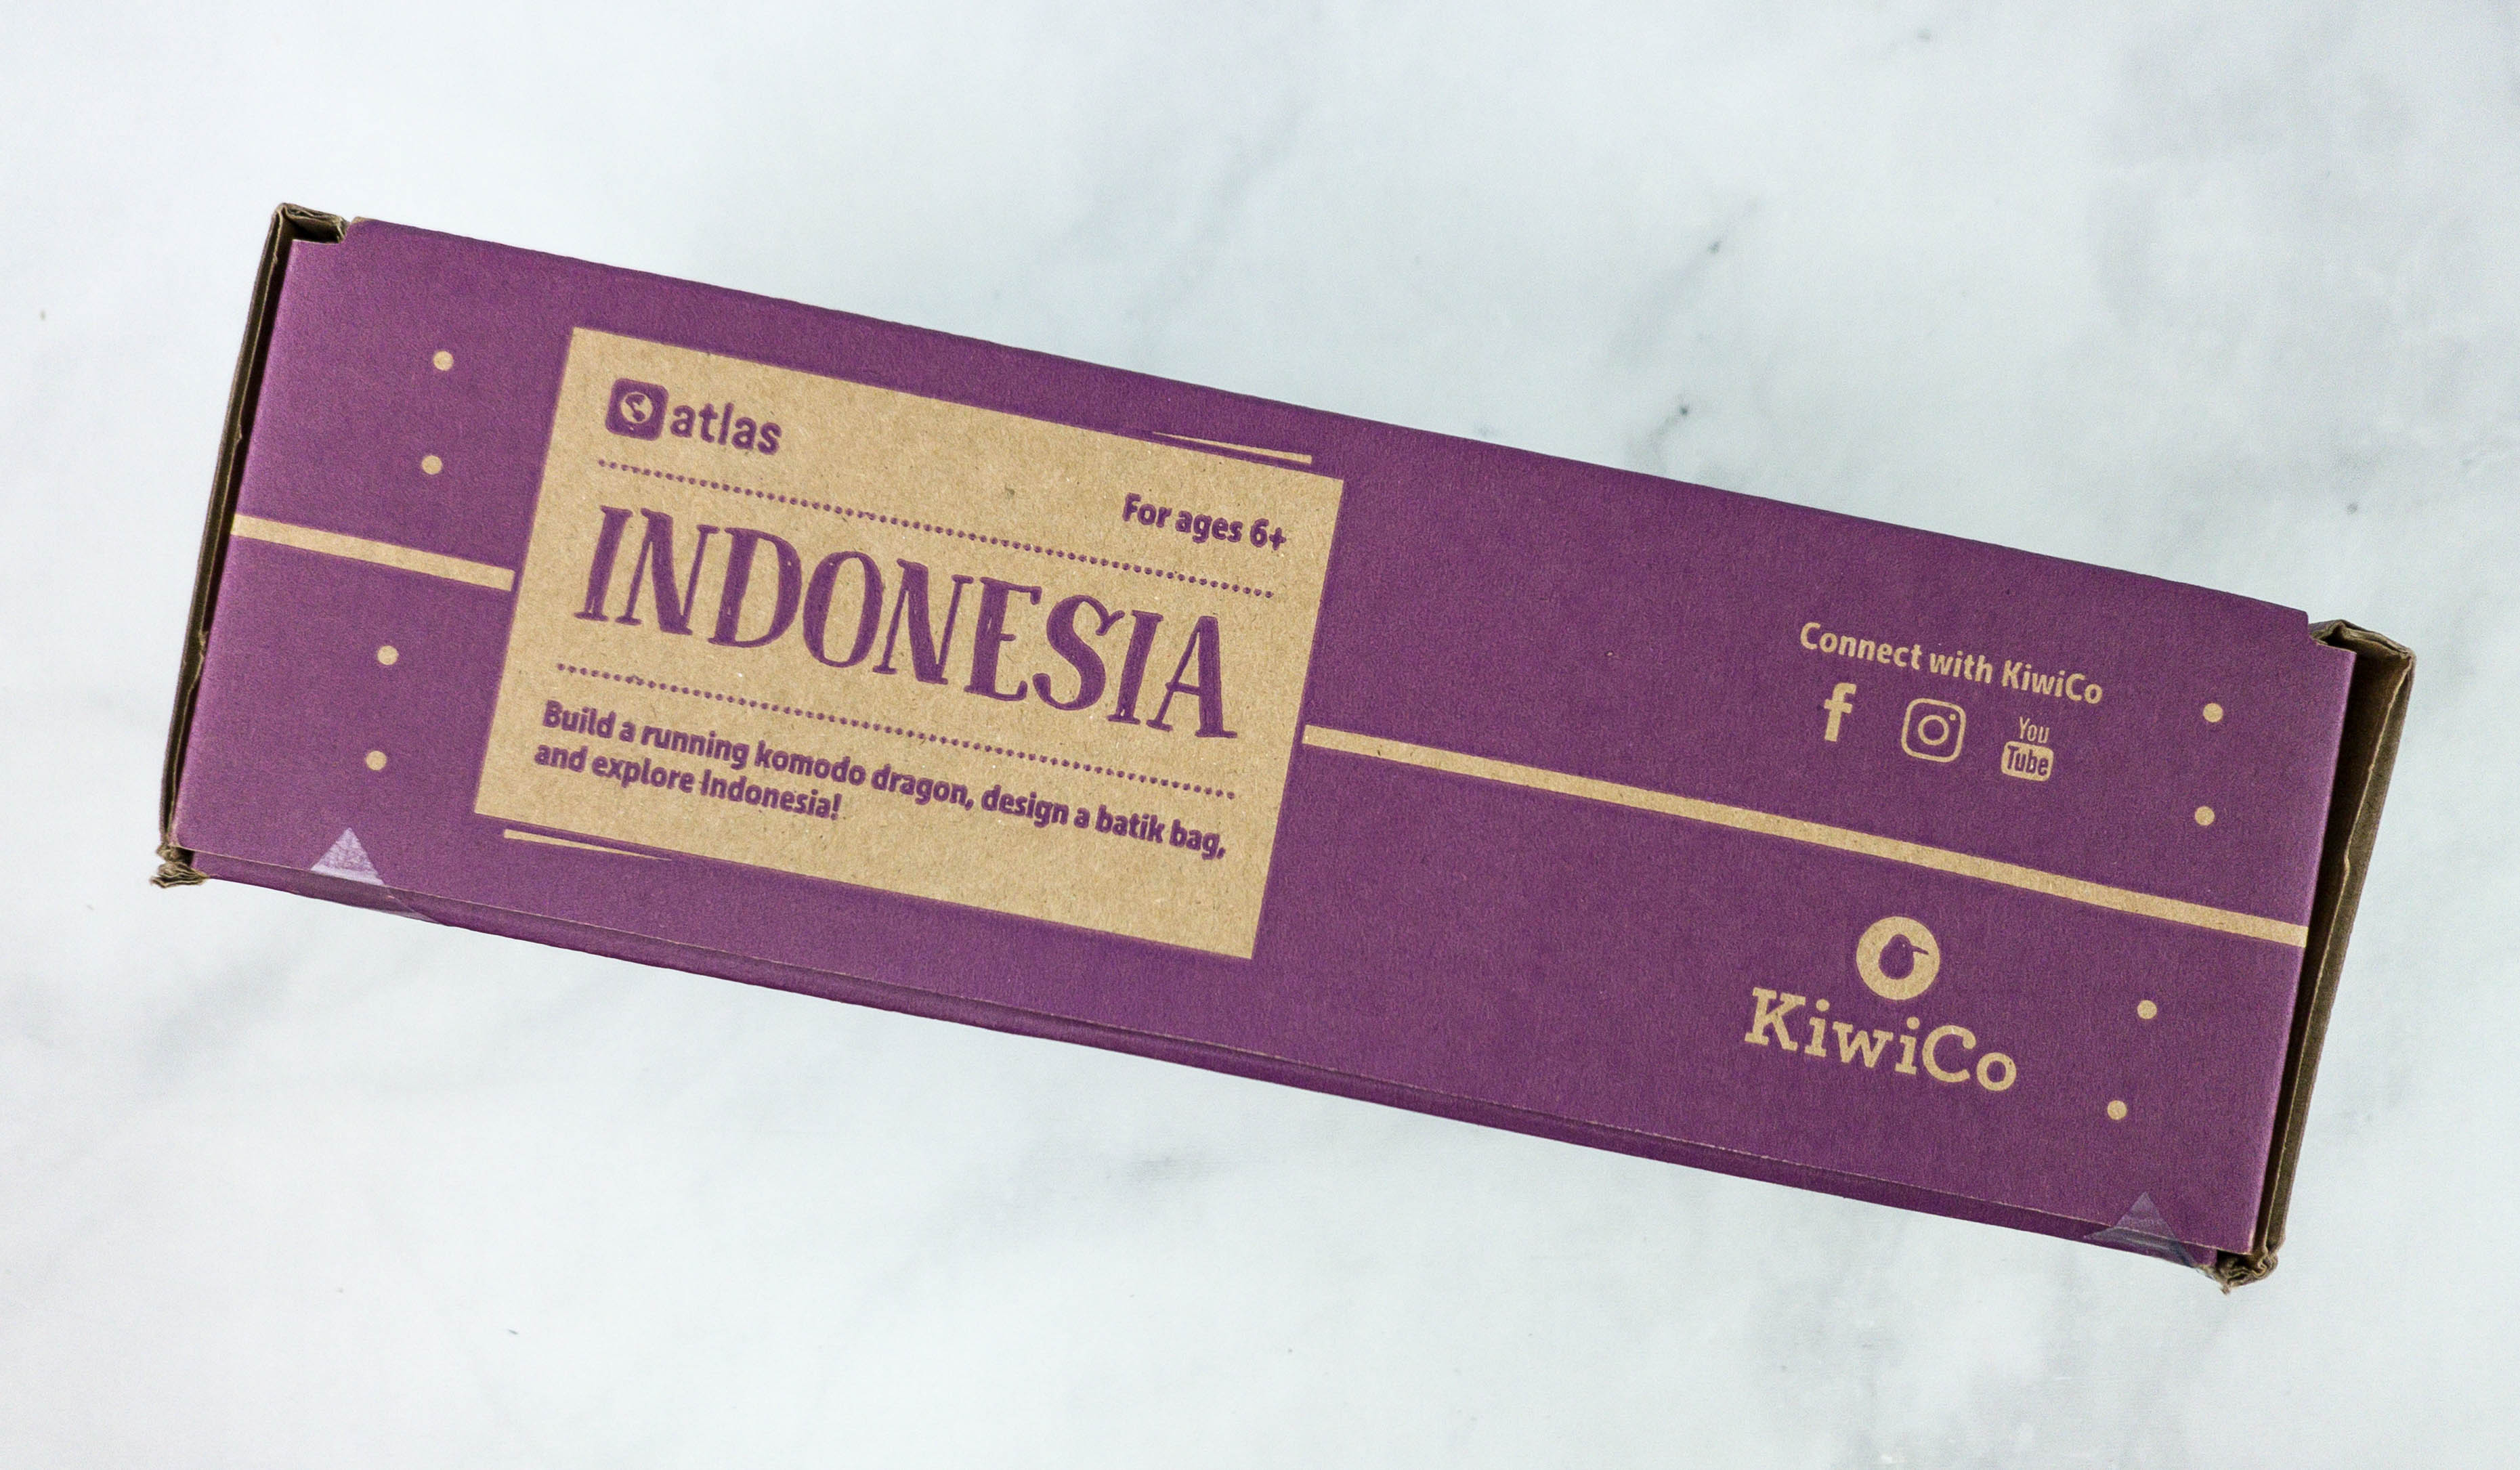 kiwico-atlas-crate-review-coupon-indonesia-hello-subscription